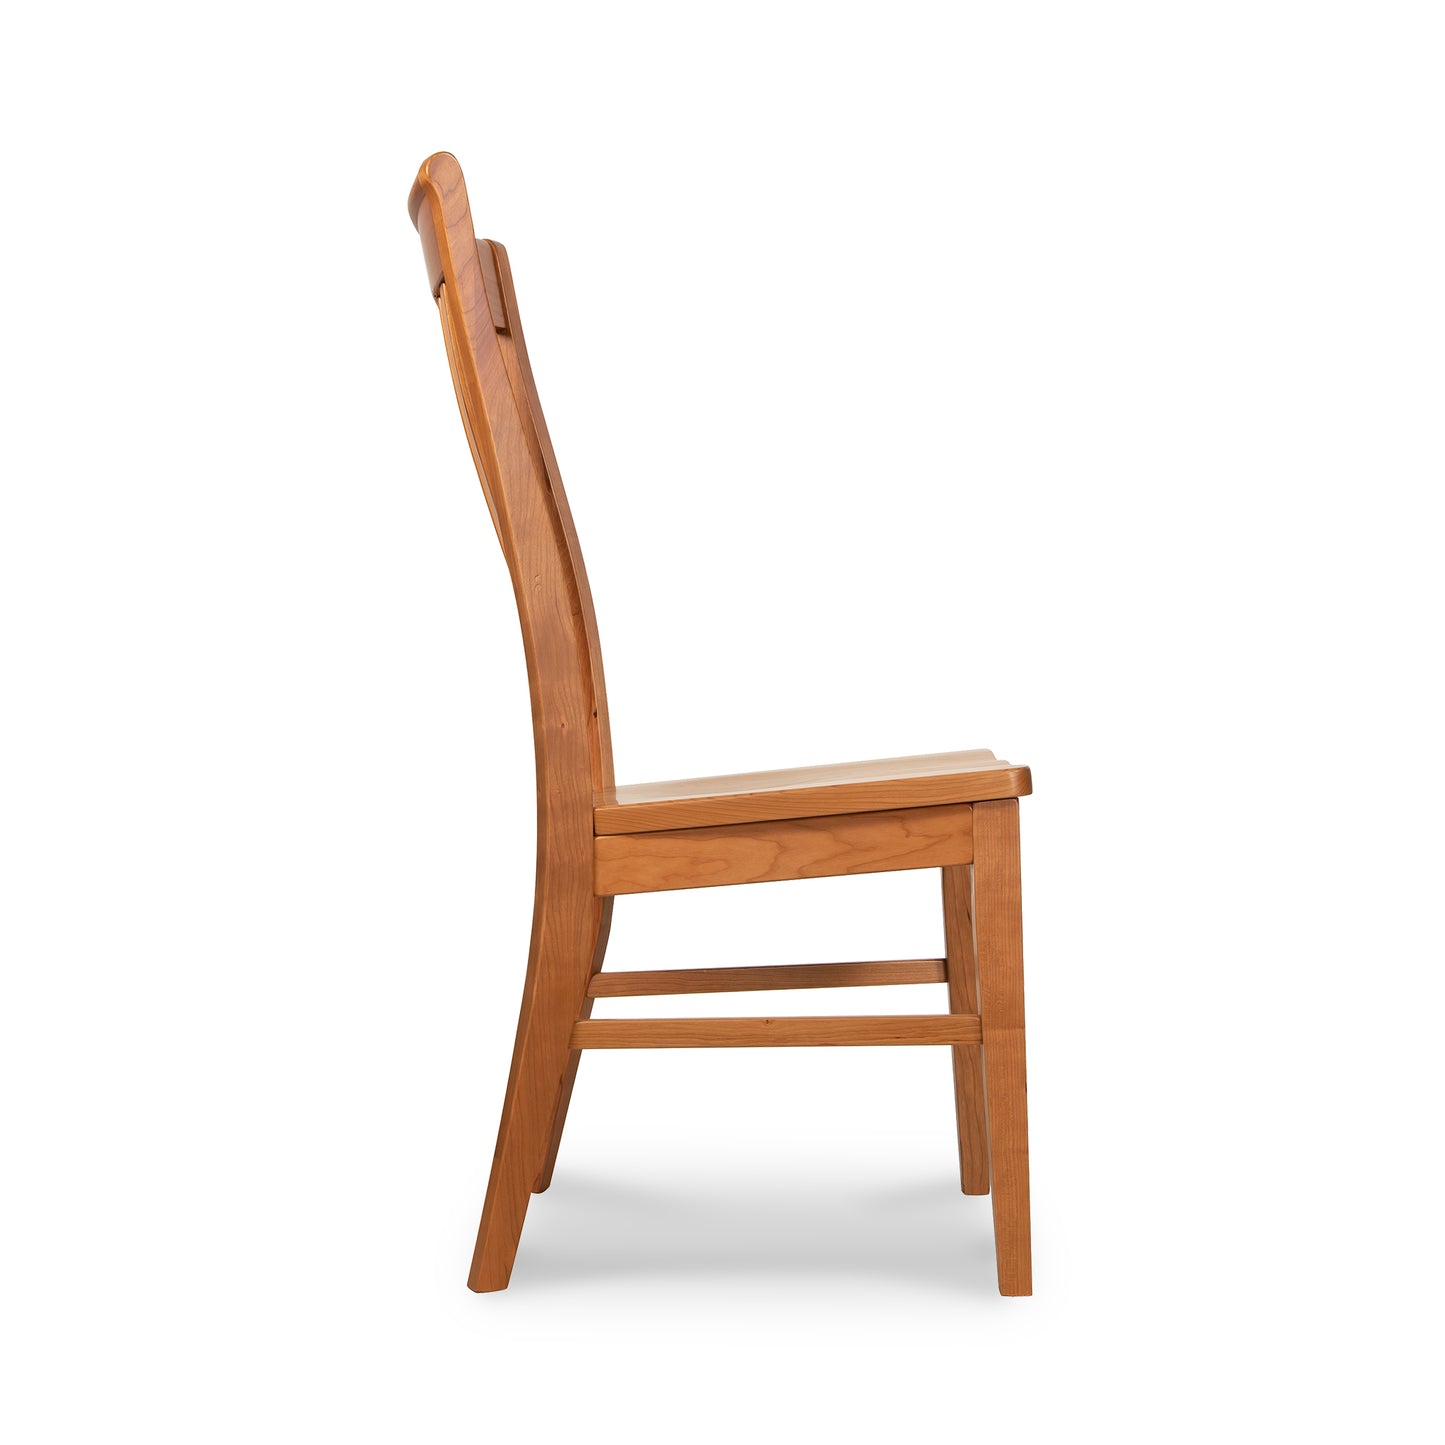 Side view of a Vermont Woods Studios Country Shaker Chair with Wood Seat, isolated on a white background.